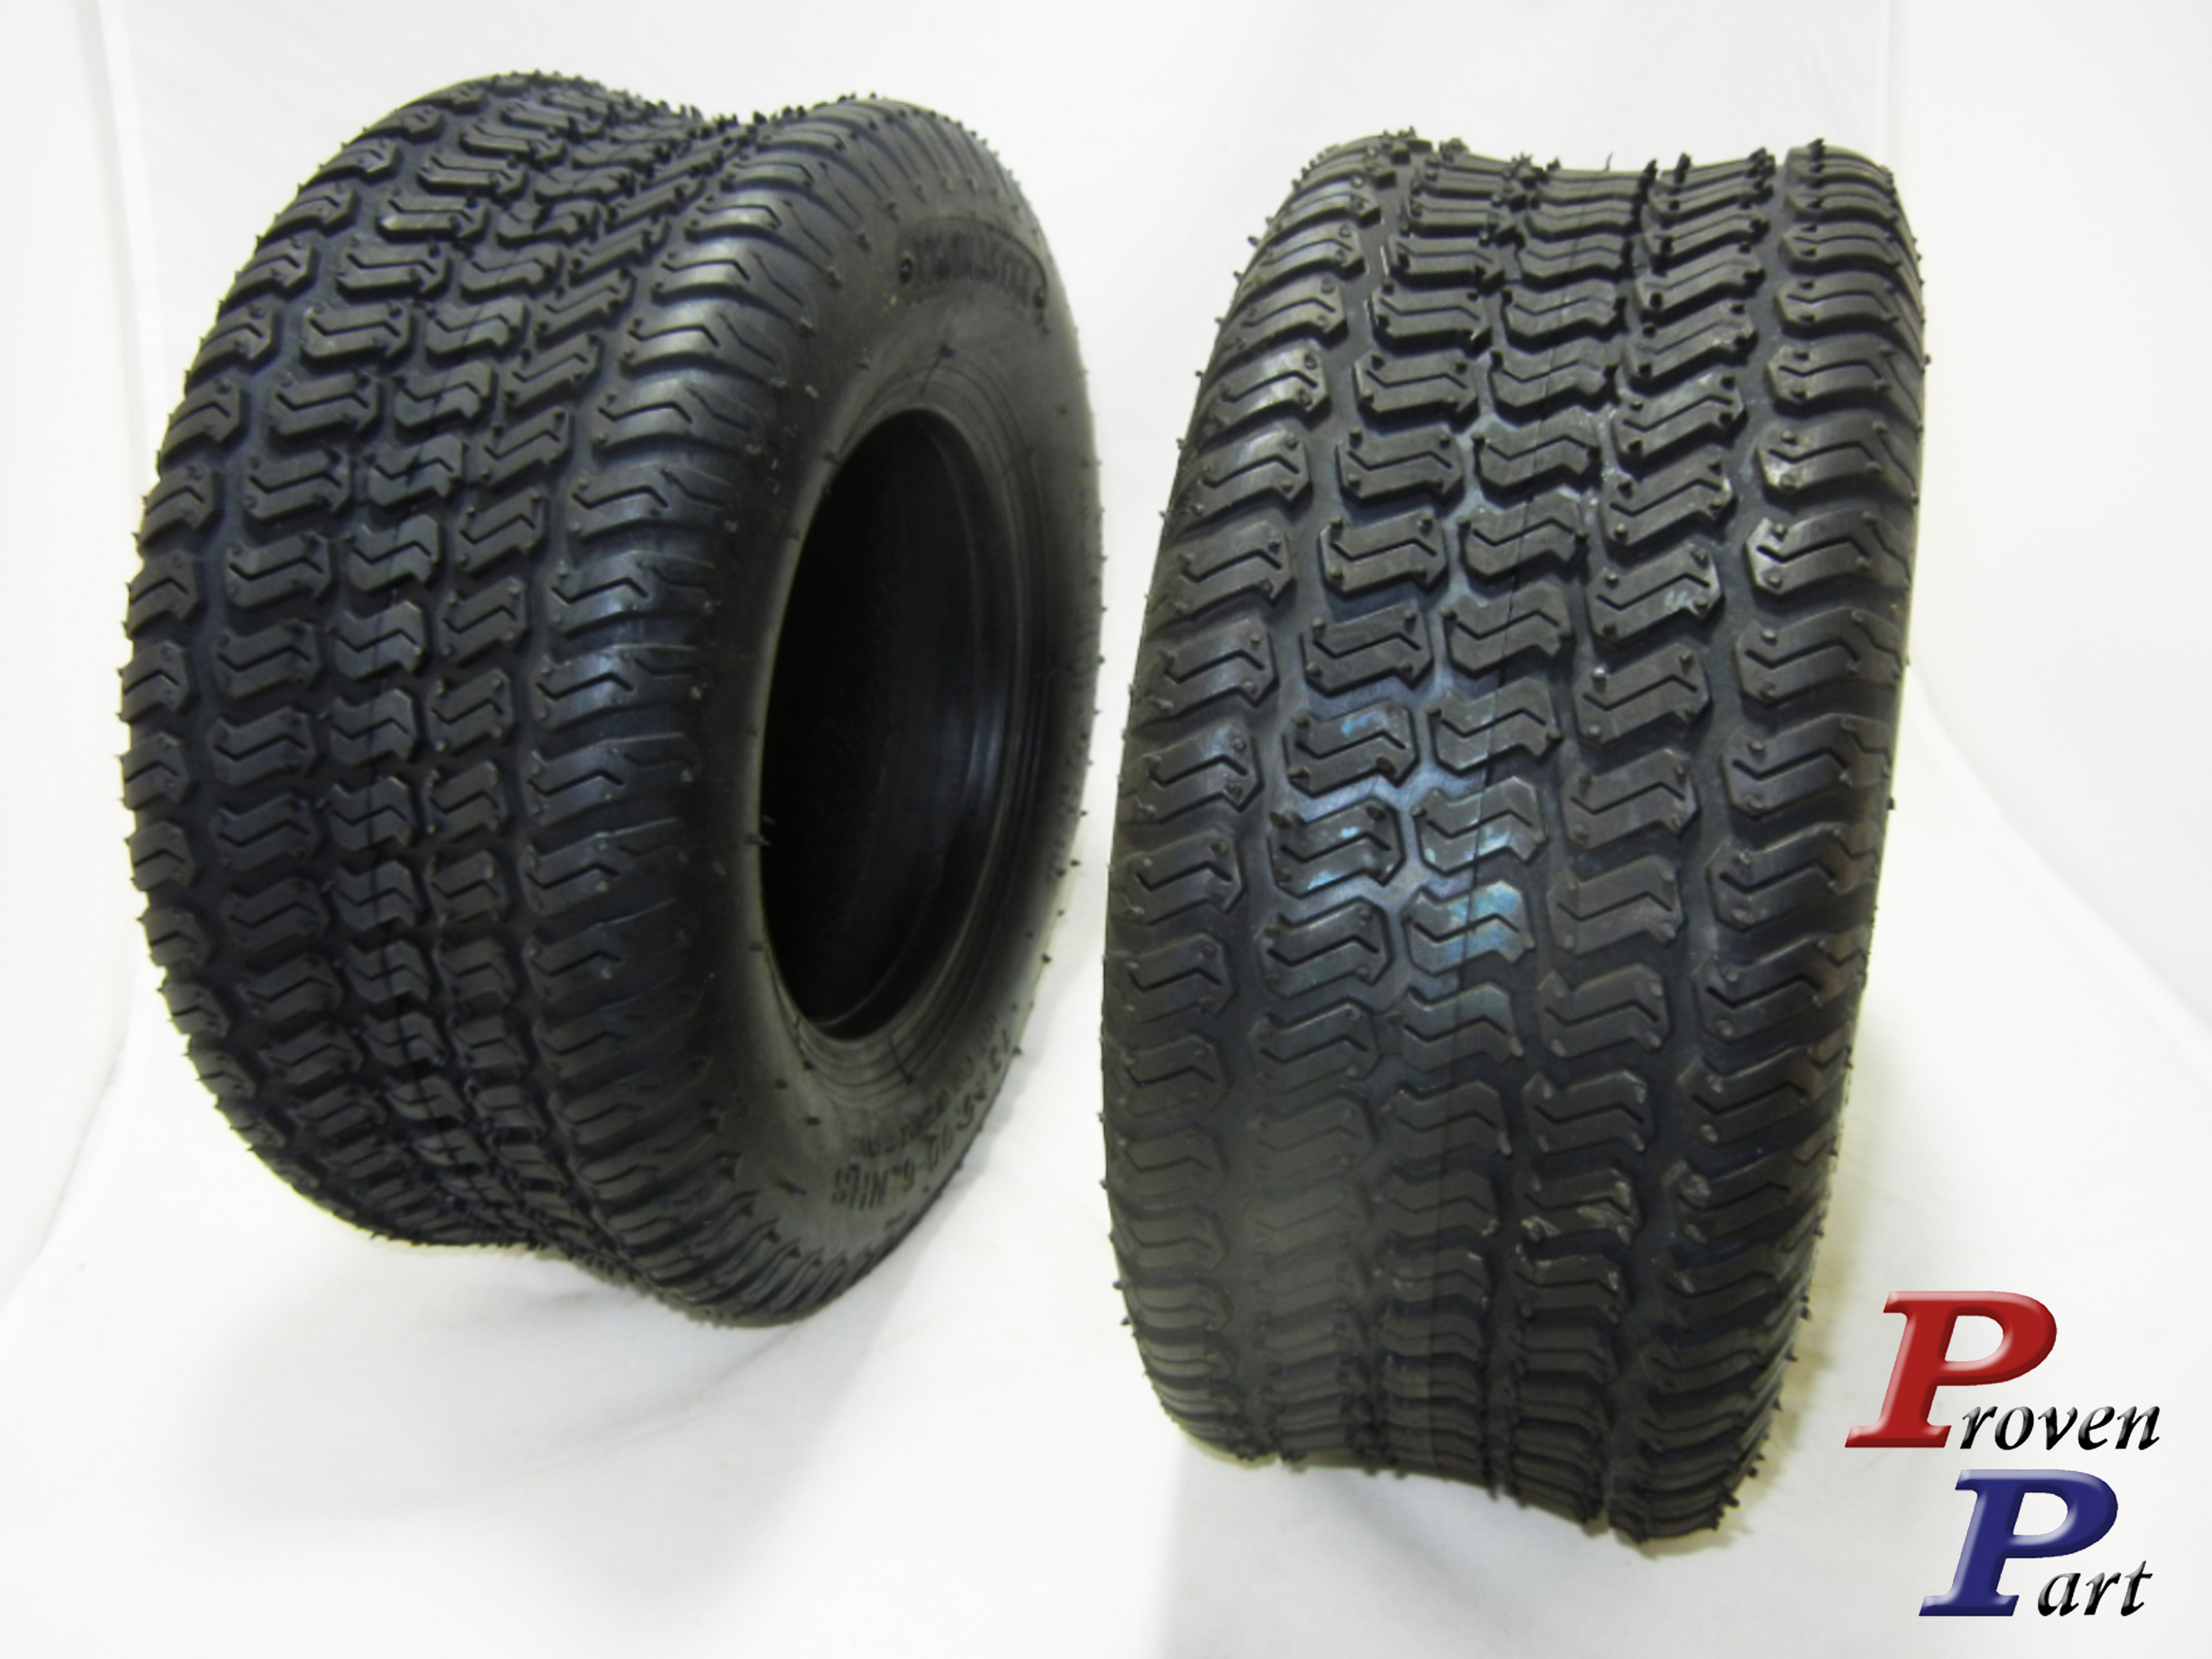 Set of 2 lawn mower tires PROMASTER 13X5.00-6 505 tubeless - Click Image to Close